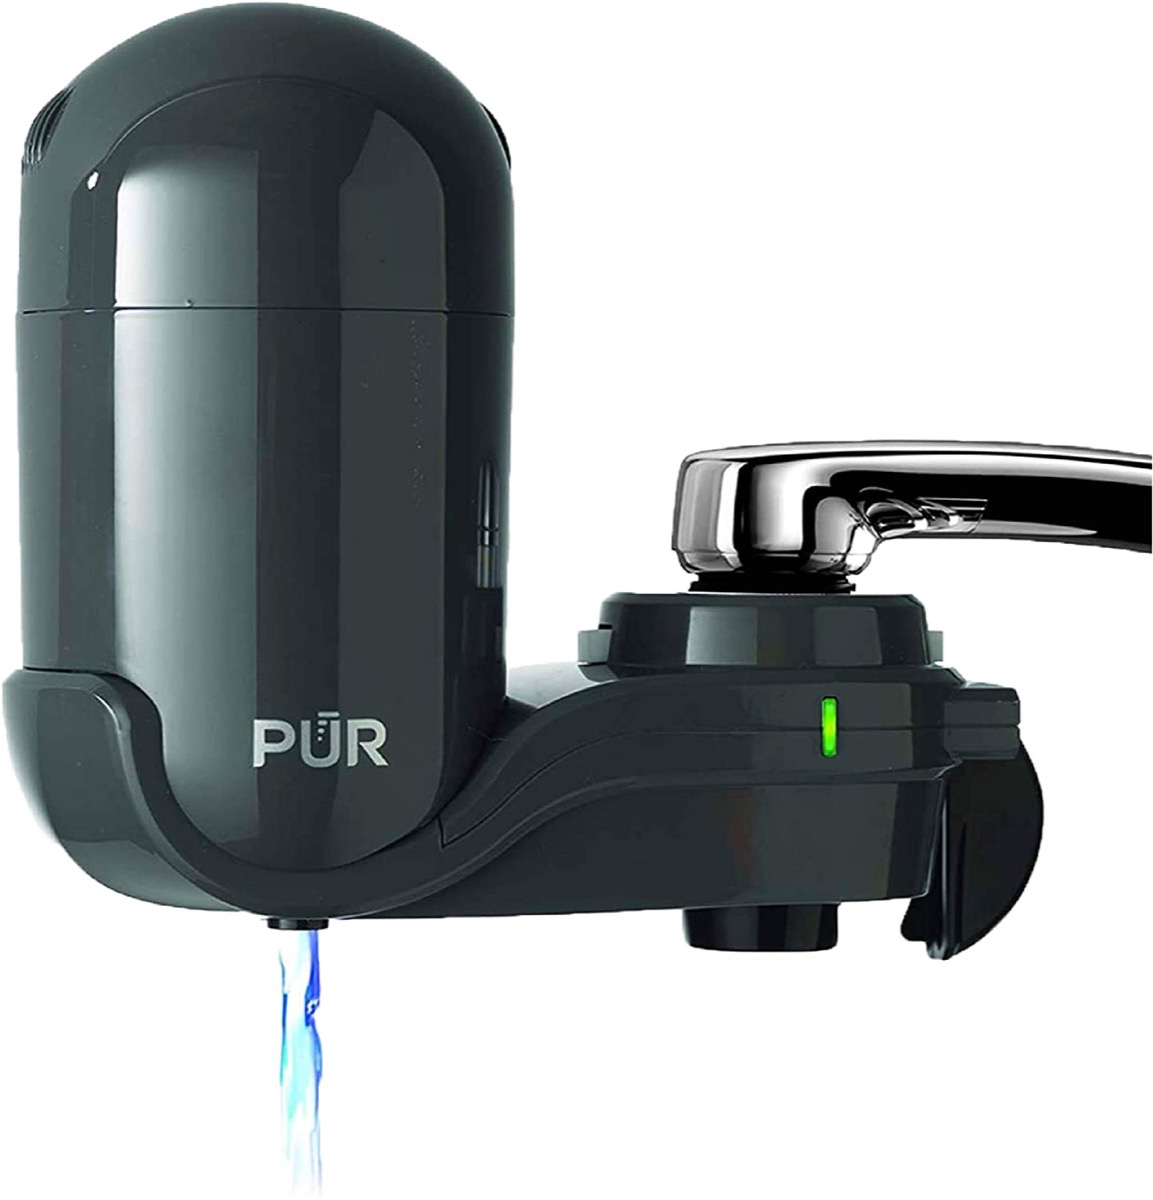 Pur water filter